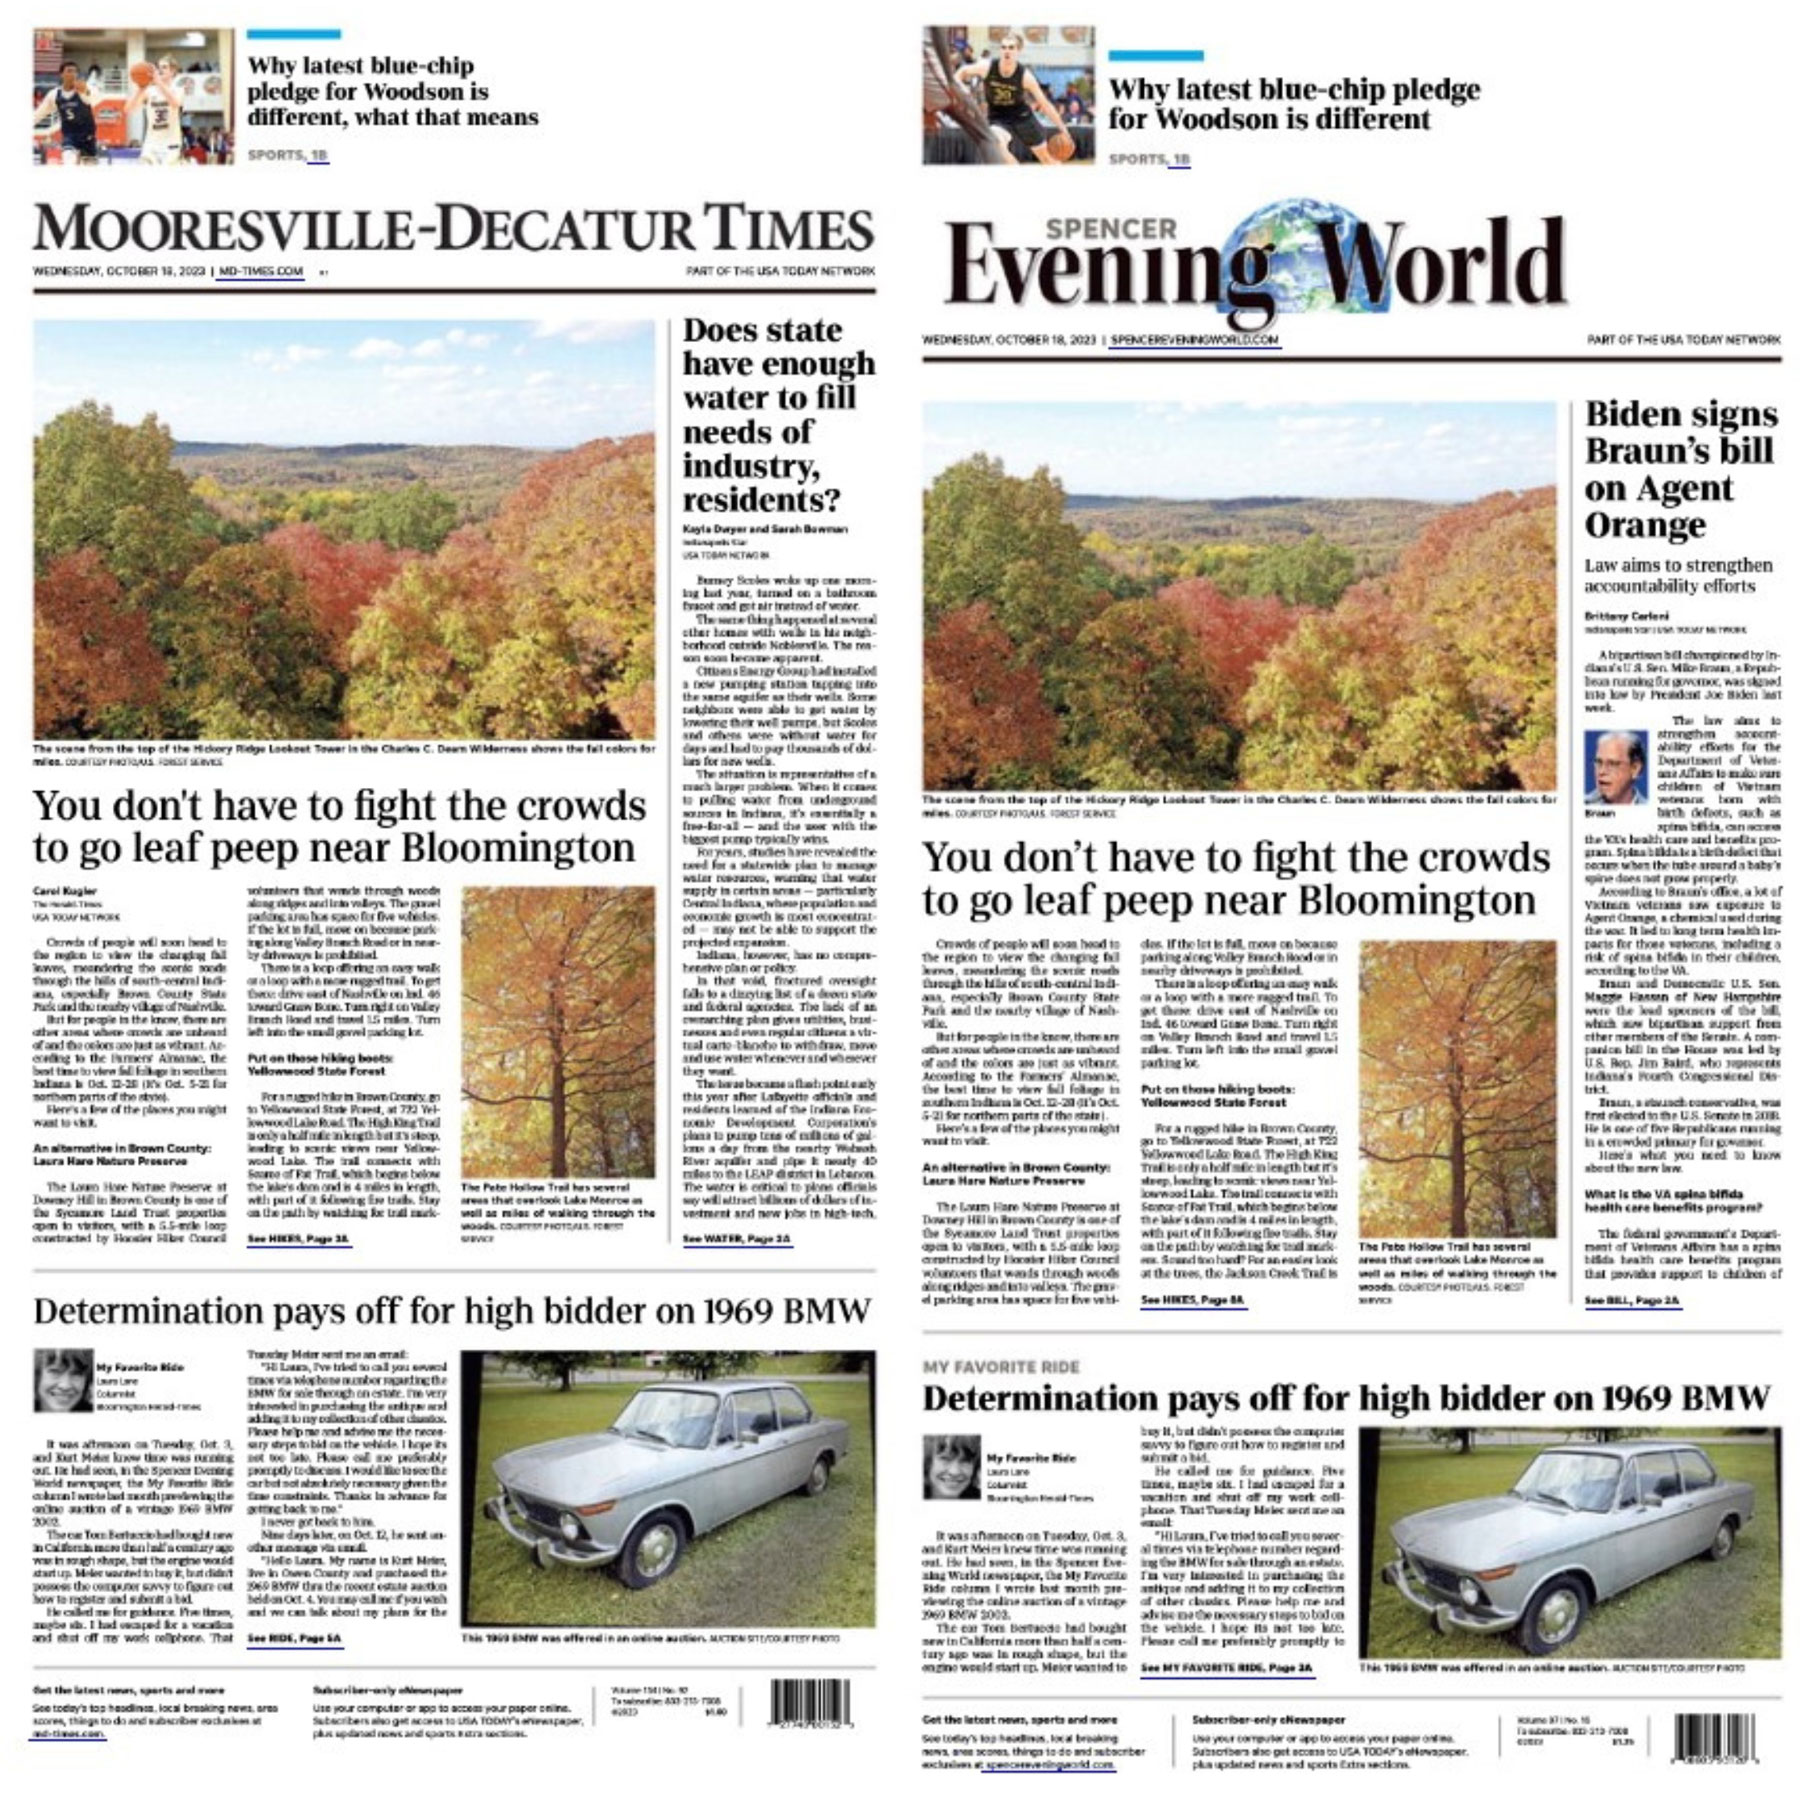 The Spencer Evening World and the Mooresville Decatur Times display almost the same front page on Wednesday, October 18, 2023